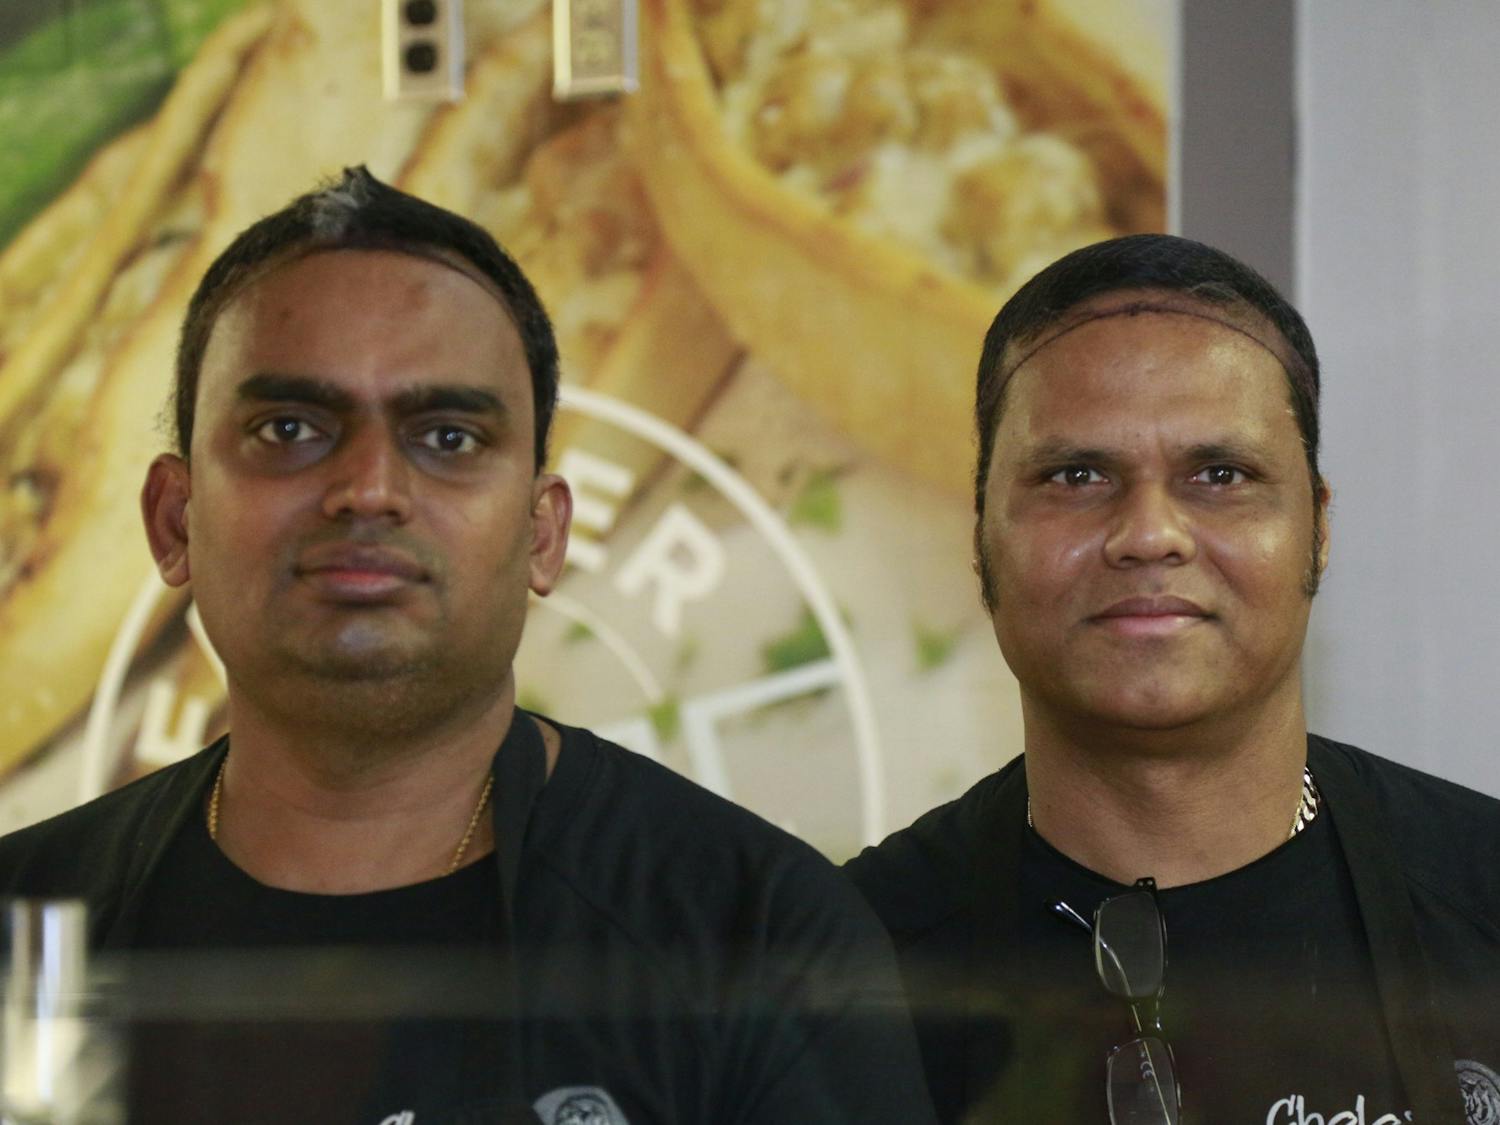 Wednesday morning on Februrary 5, 2020, Raja and Durai prepare to open CholaNad, a restaurant in the bottom of Lenoir. They are from Tamil Nadu, a region that inspires many CholaNad dishes.